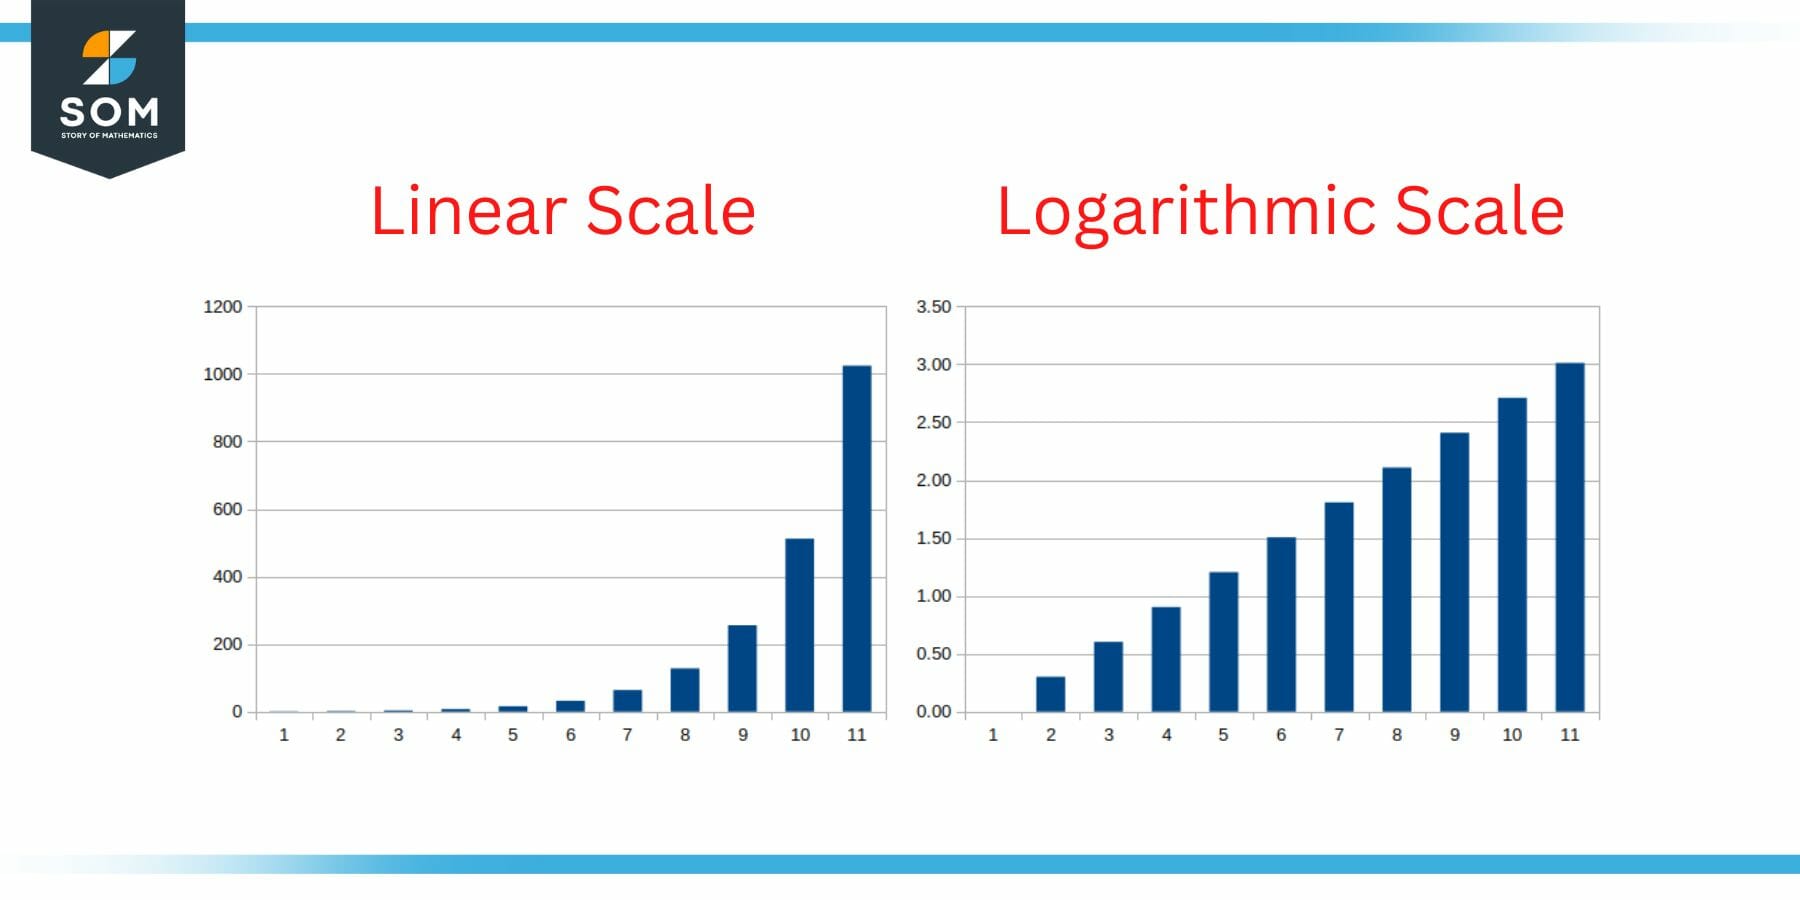 Logarithmic Scale for Common Ratio and Geometric Sequences